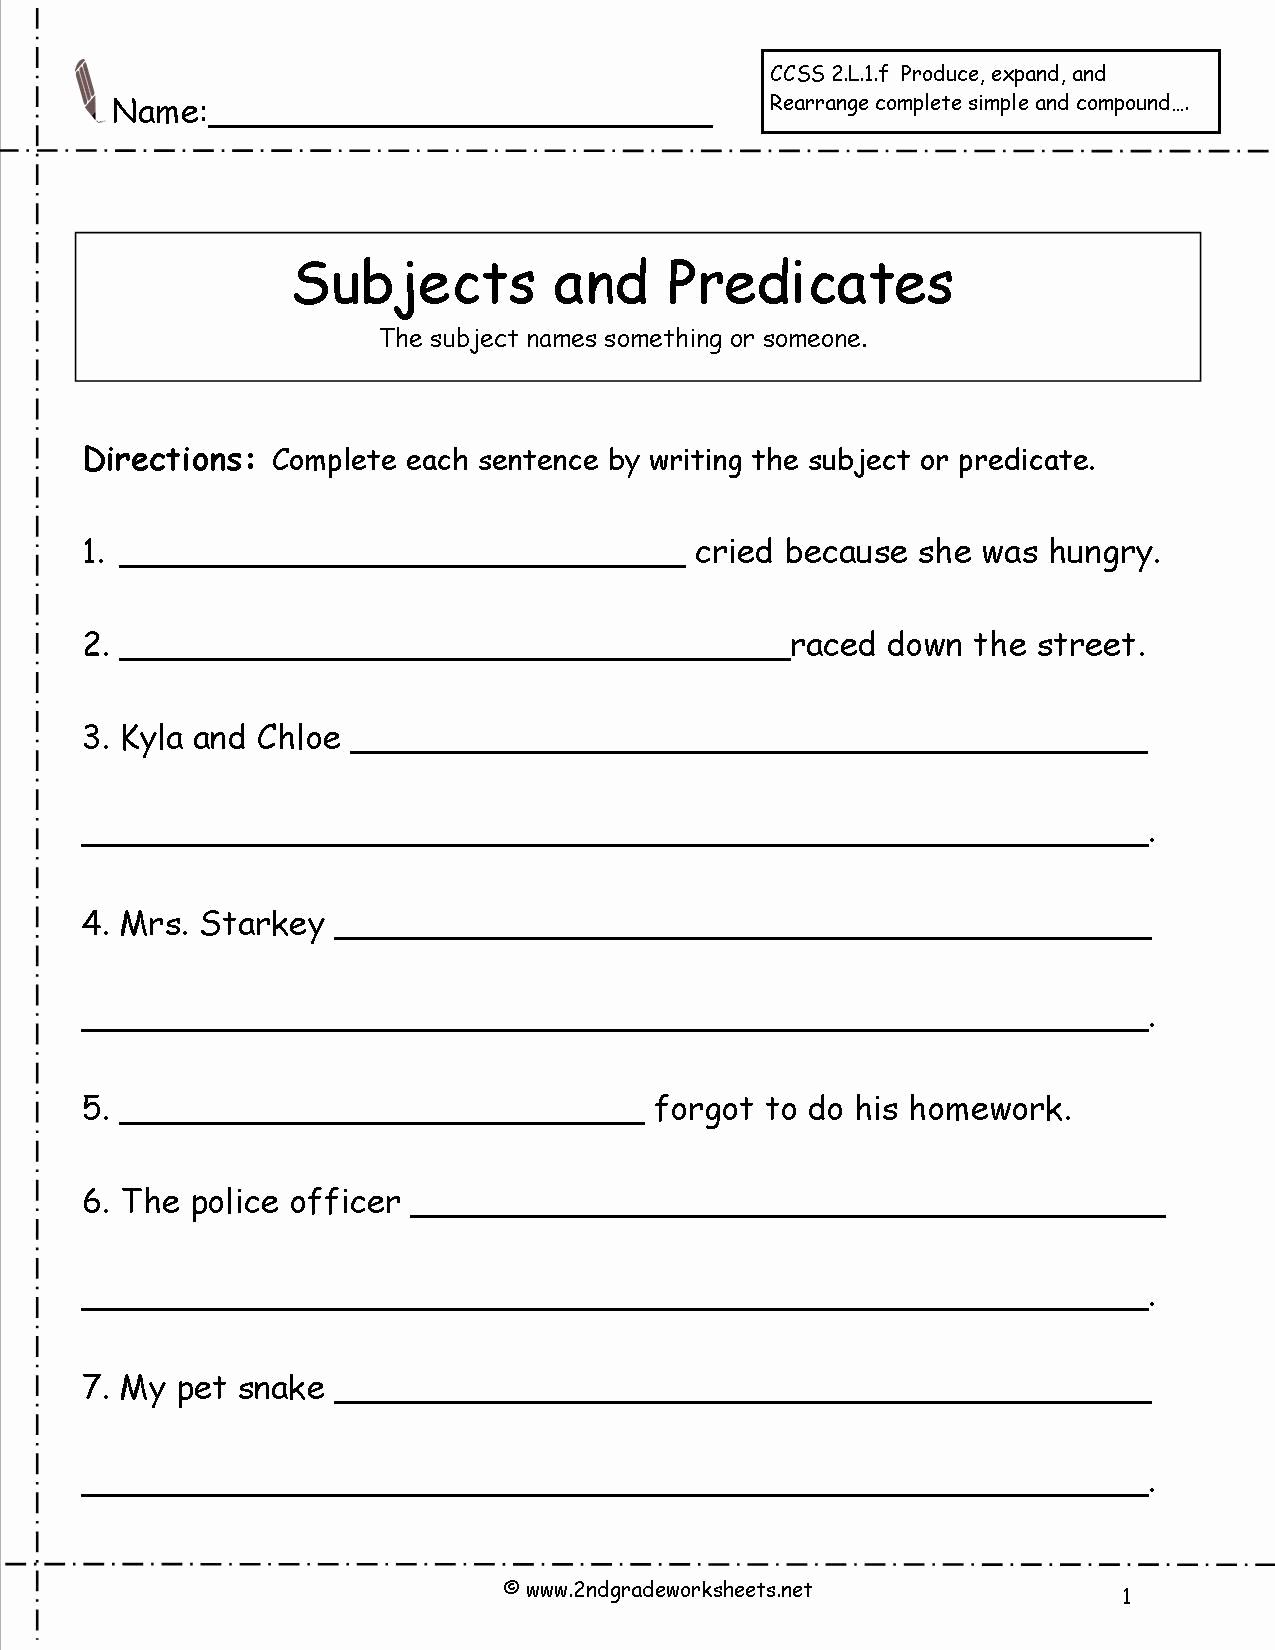 Free Subject and Predicate Worksheets Awesome Free Printable Subject Predicate Worksheets 2nd Grade